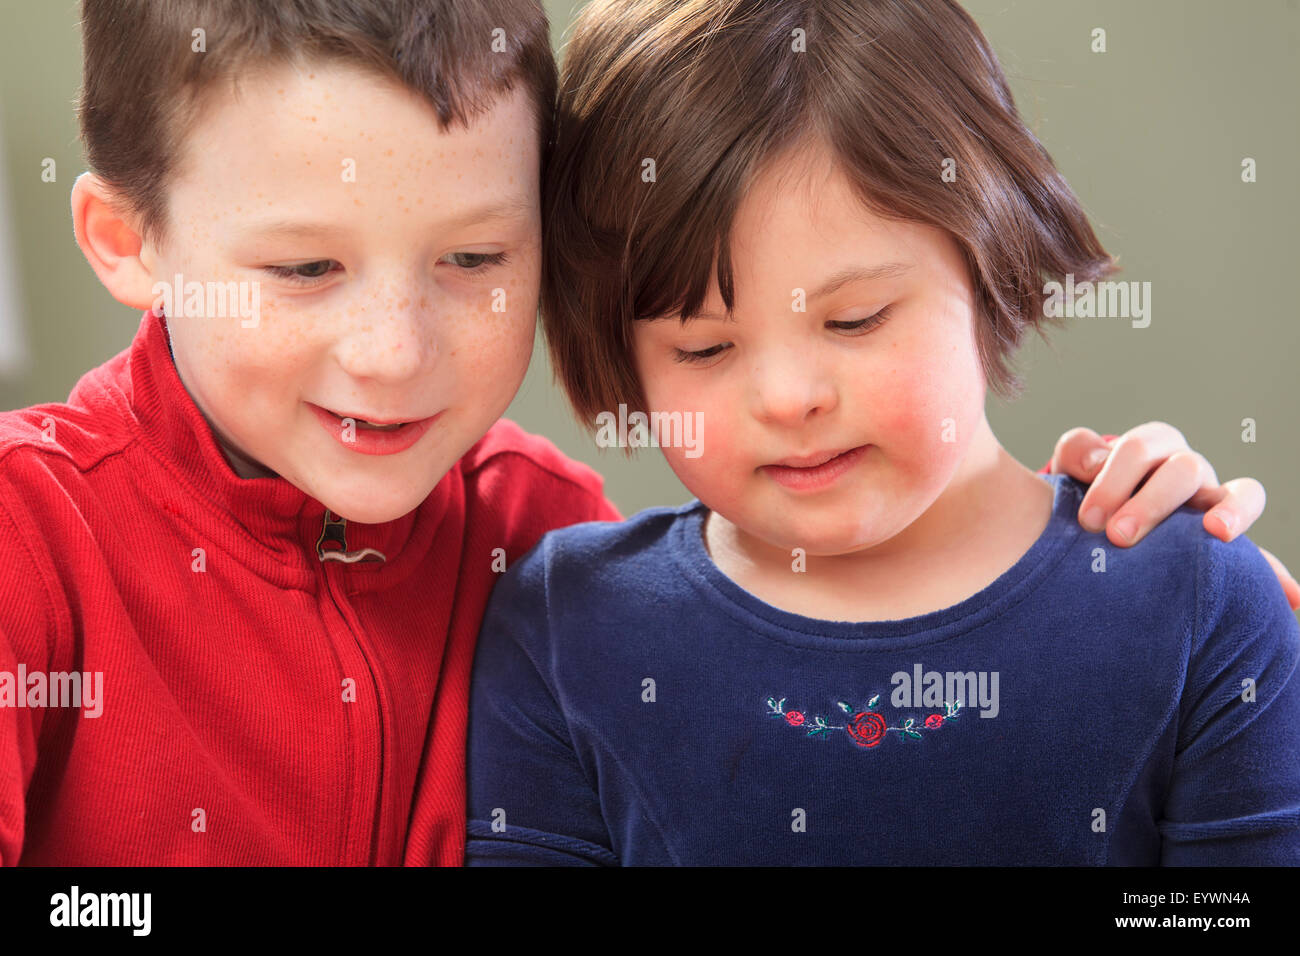 Little girl with Down Syndrome with her brother Stock Photo